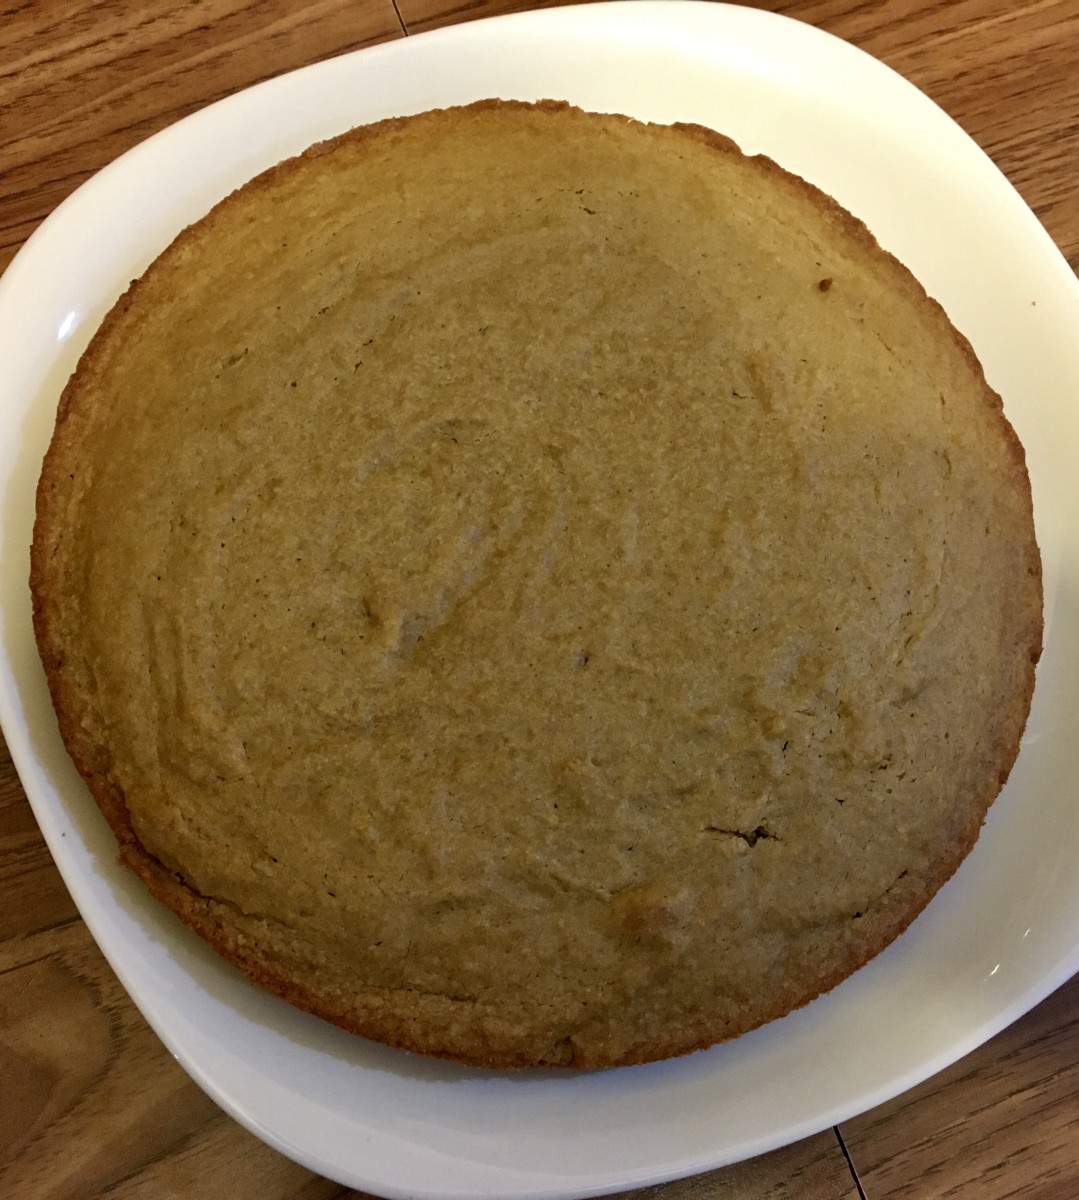 How to Make Healthy Wheat and Oats Orange Cake